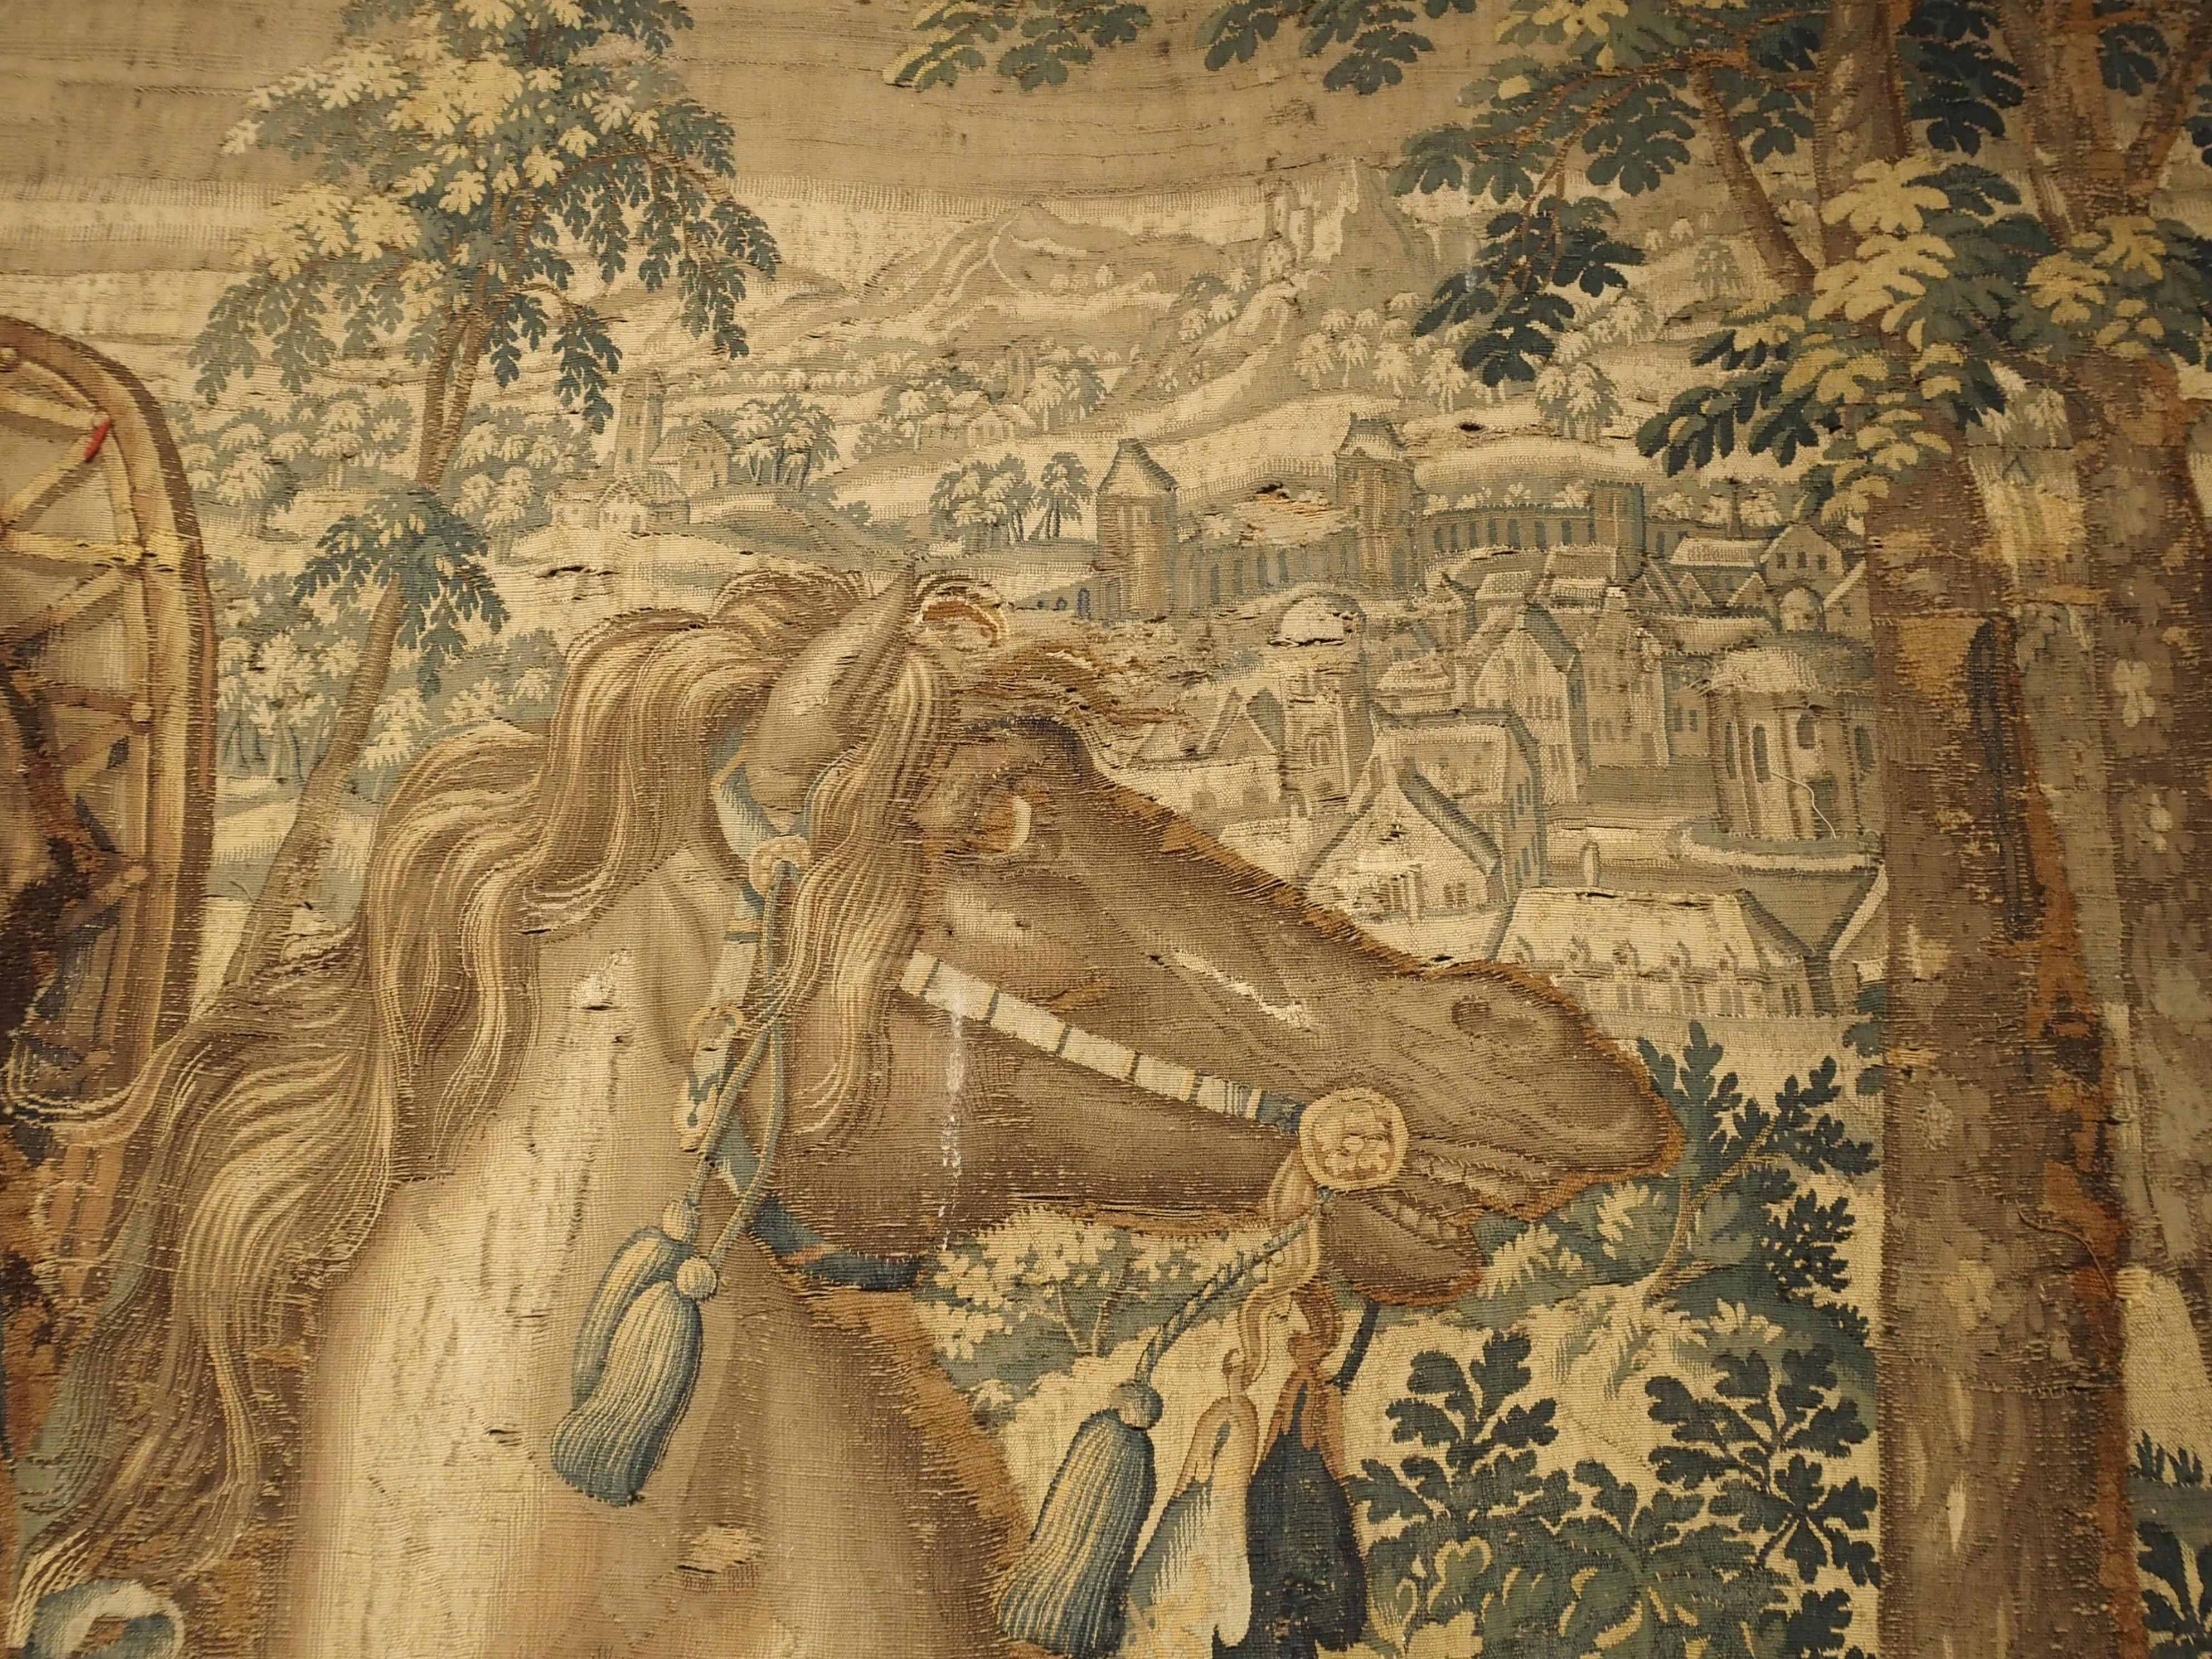 The details on this tapestry are absolutely superb. It was woven in Flanders in the 1600s. The village in the background for instance, is so finely woven you can see the architectural ornamentation of each building. Some of the foliate details